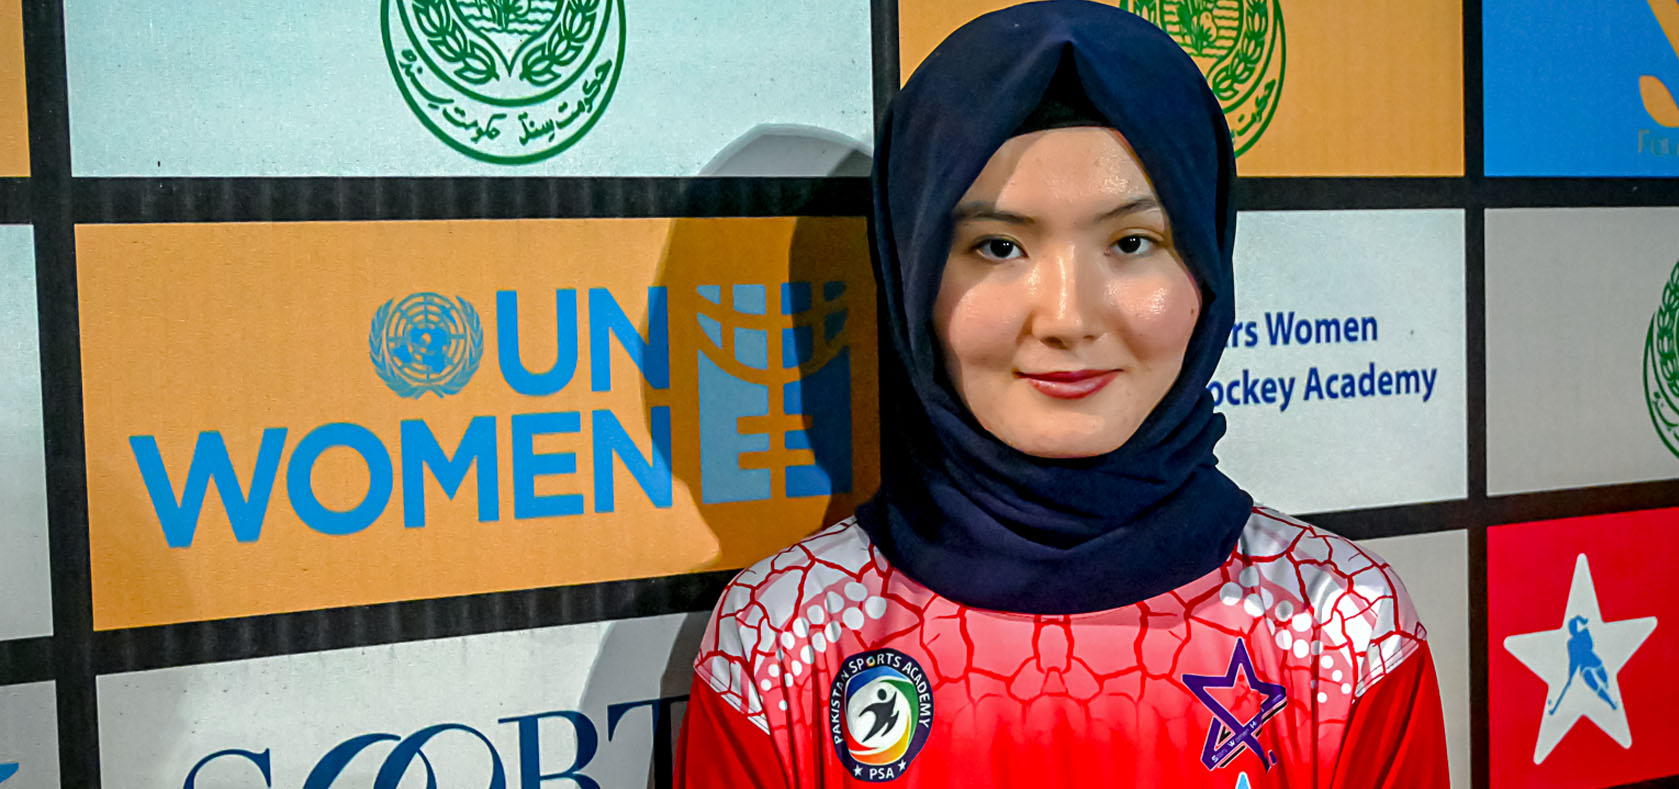 A woman stands in front of the UN Women banner with her sports attire